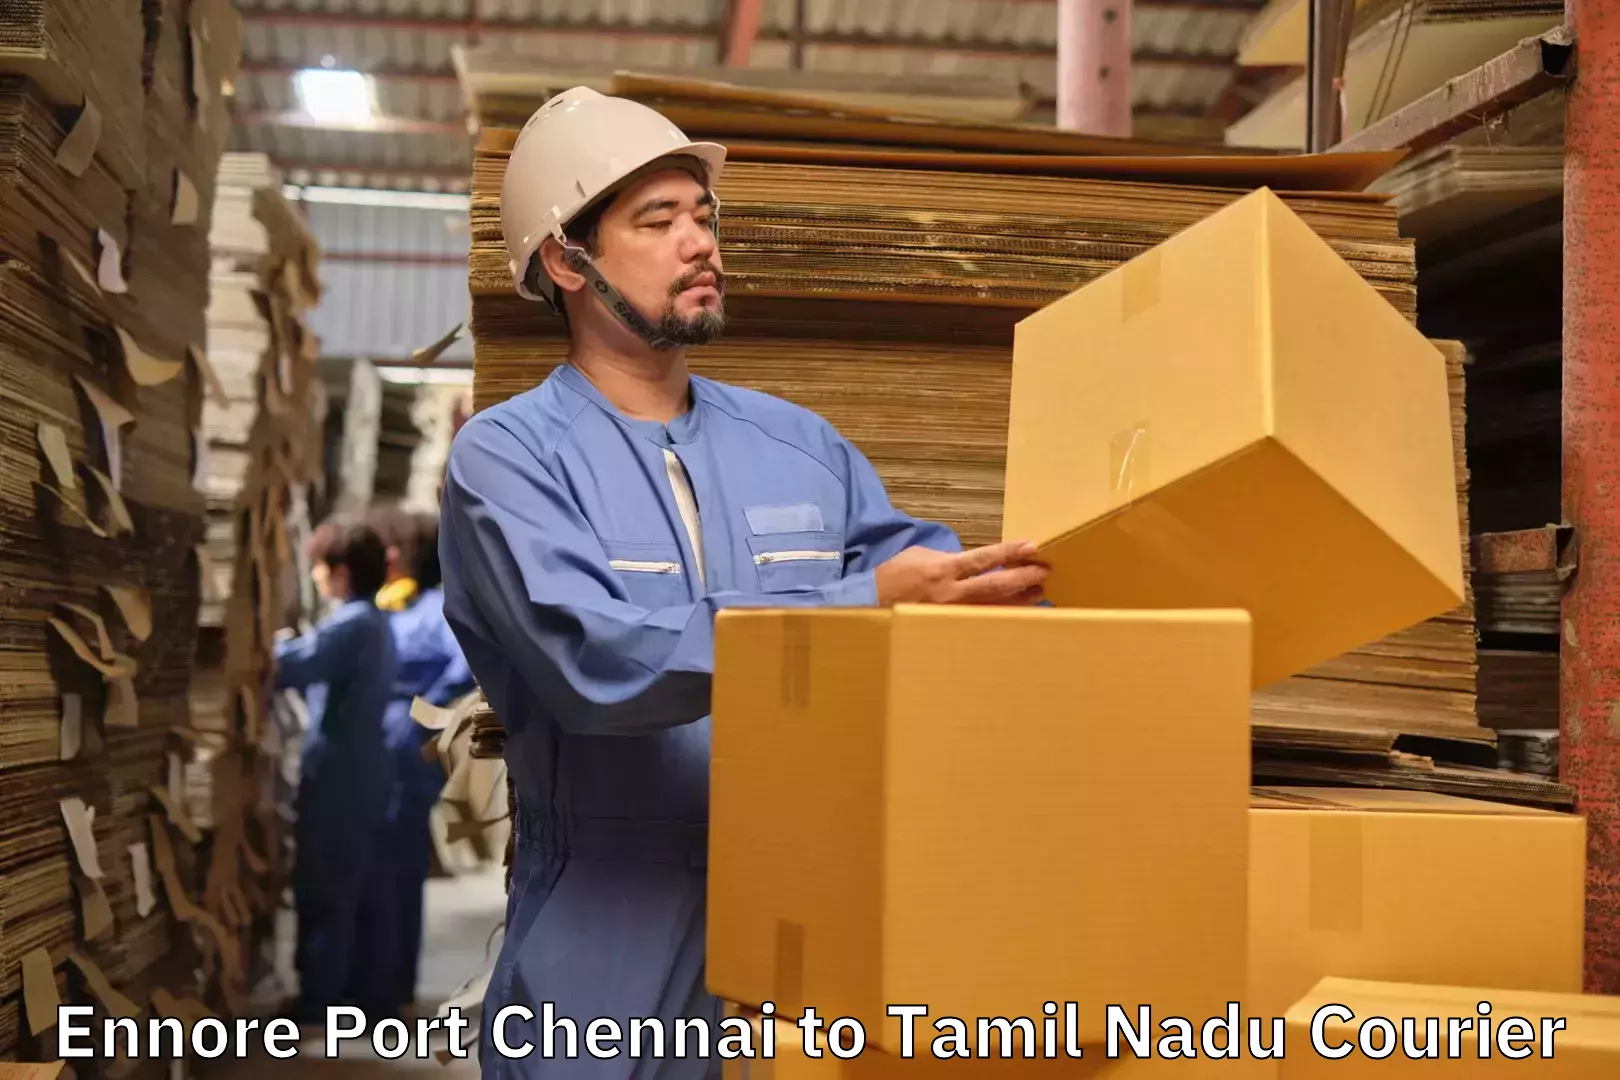 Luggage shipping specialists Ennore Port Chennai to Thisayanvilai